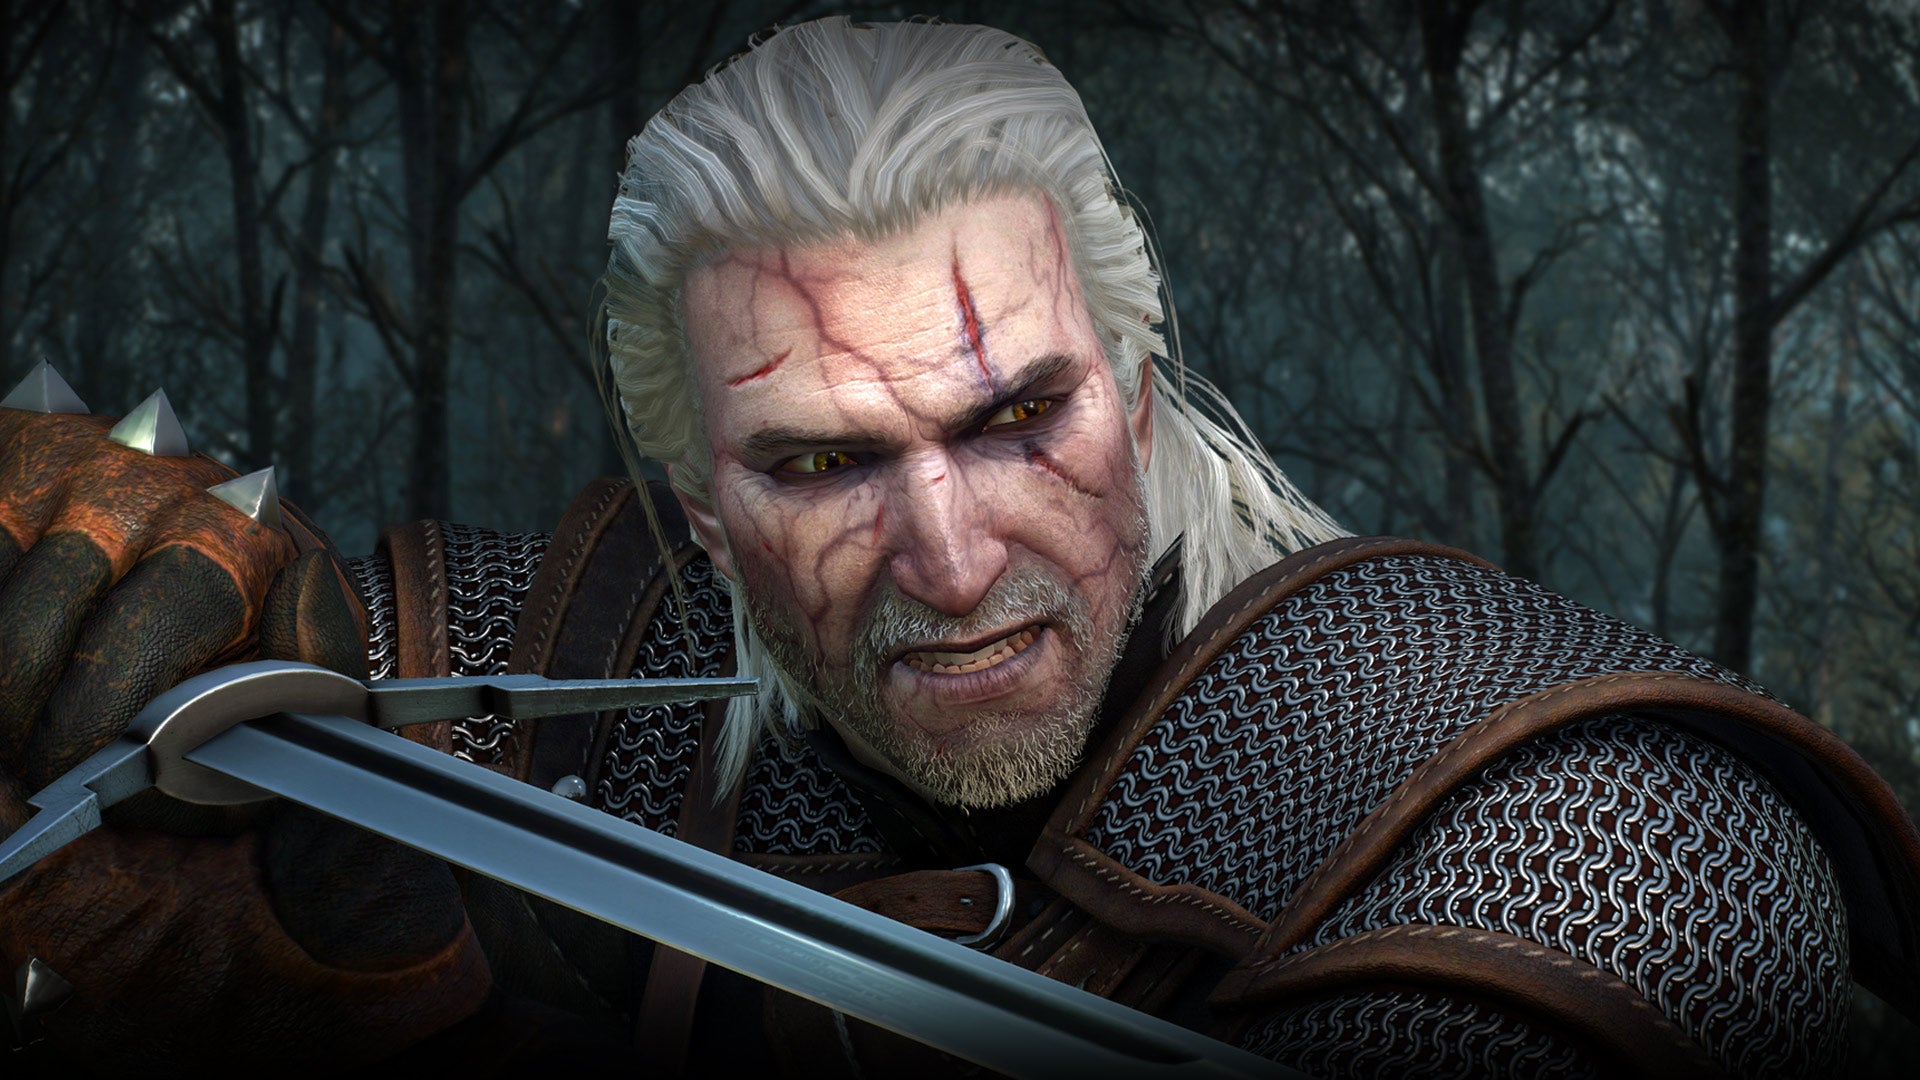 The Witcher 3: Wild Hunt may getting Xbox One X and PS4 Pro enhancement patches after all | VG247